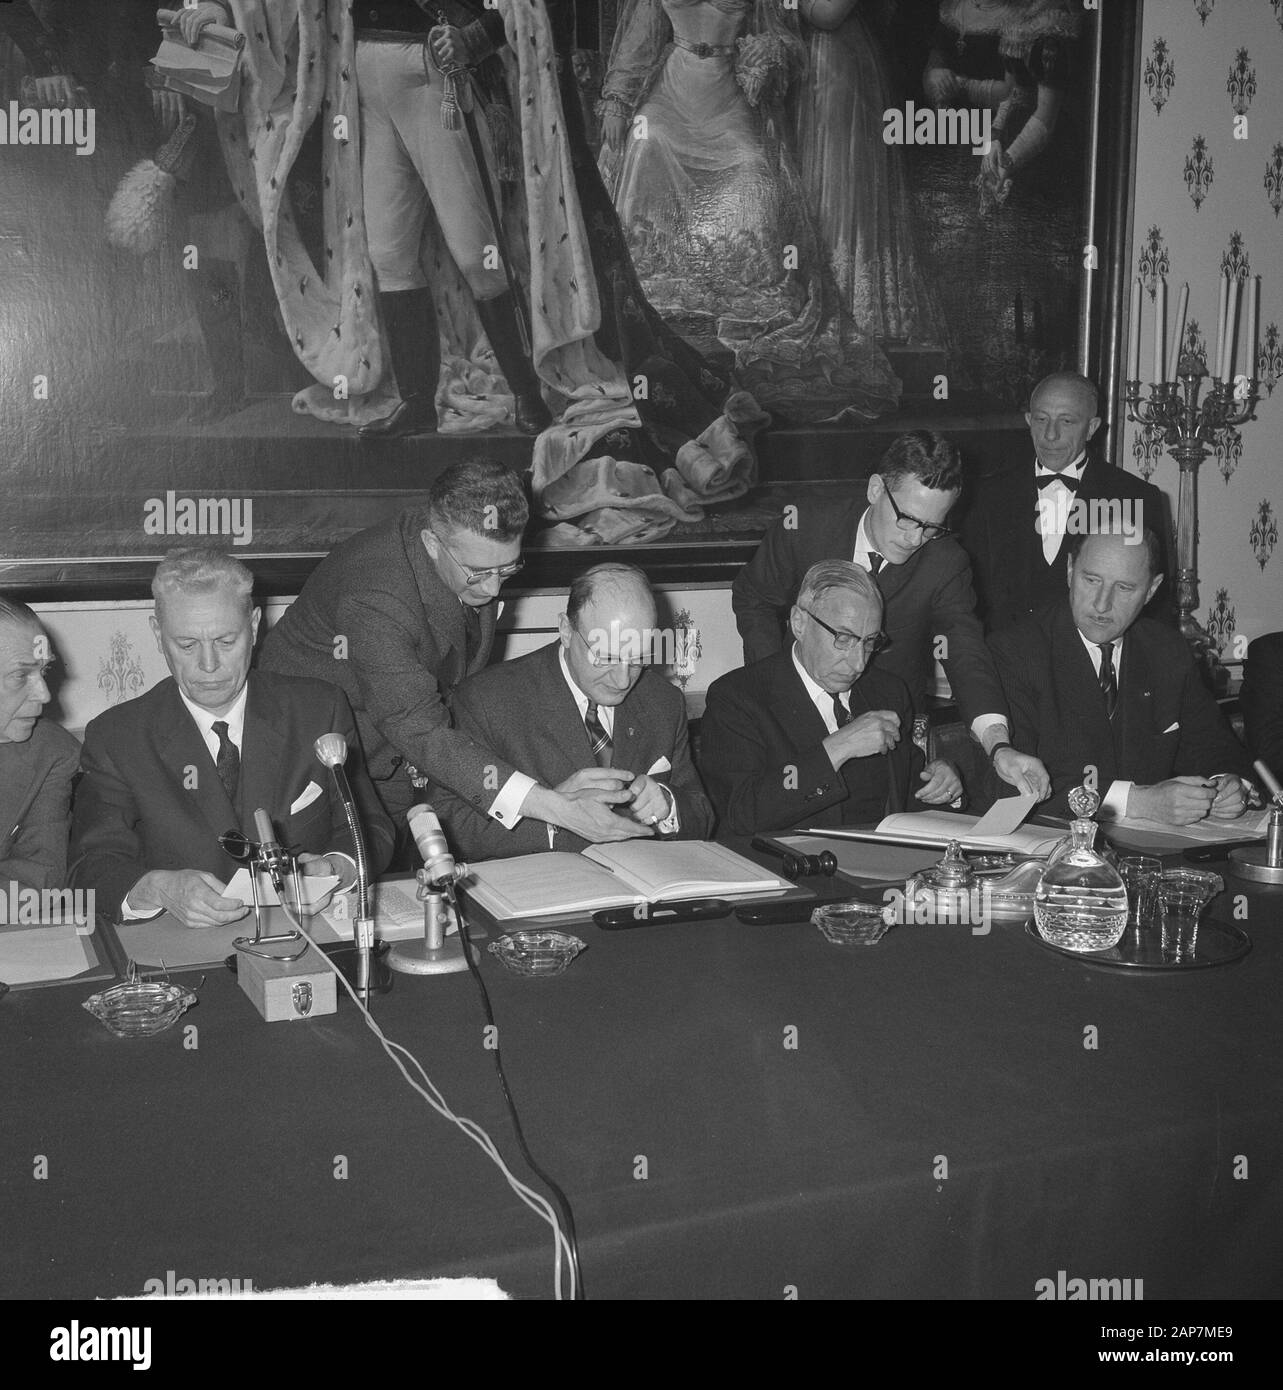 Schelde-Rhine connection signed, sitting by l.n.r. Minister Fayat, Prime Minister Lefevre, pr. The Quay Minister Luns and jr. mr. dr. A. W. L. Tjarda of $Date: 13 May 1963 Keywords: signatures, ministers Personal name: Luns, J.A.M.H., Luns, Joseph Stock Photo